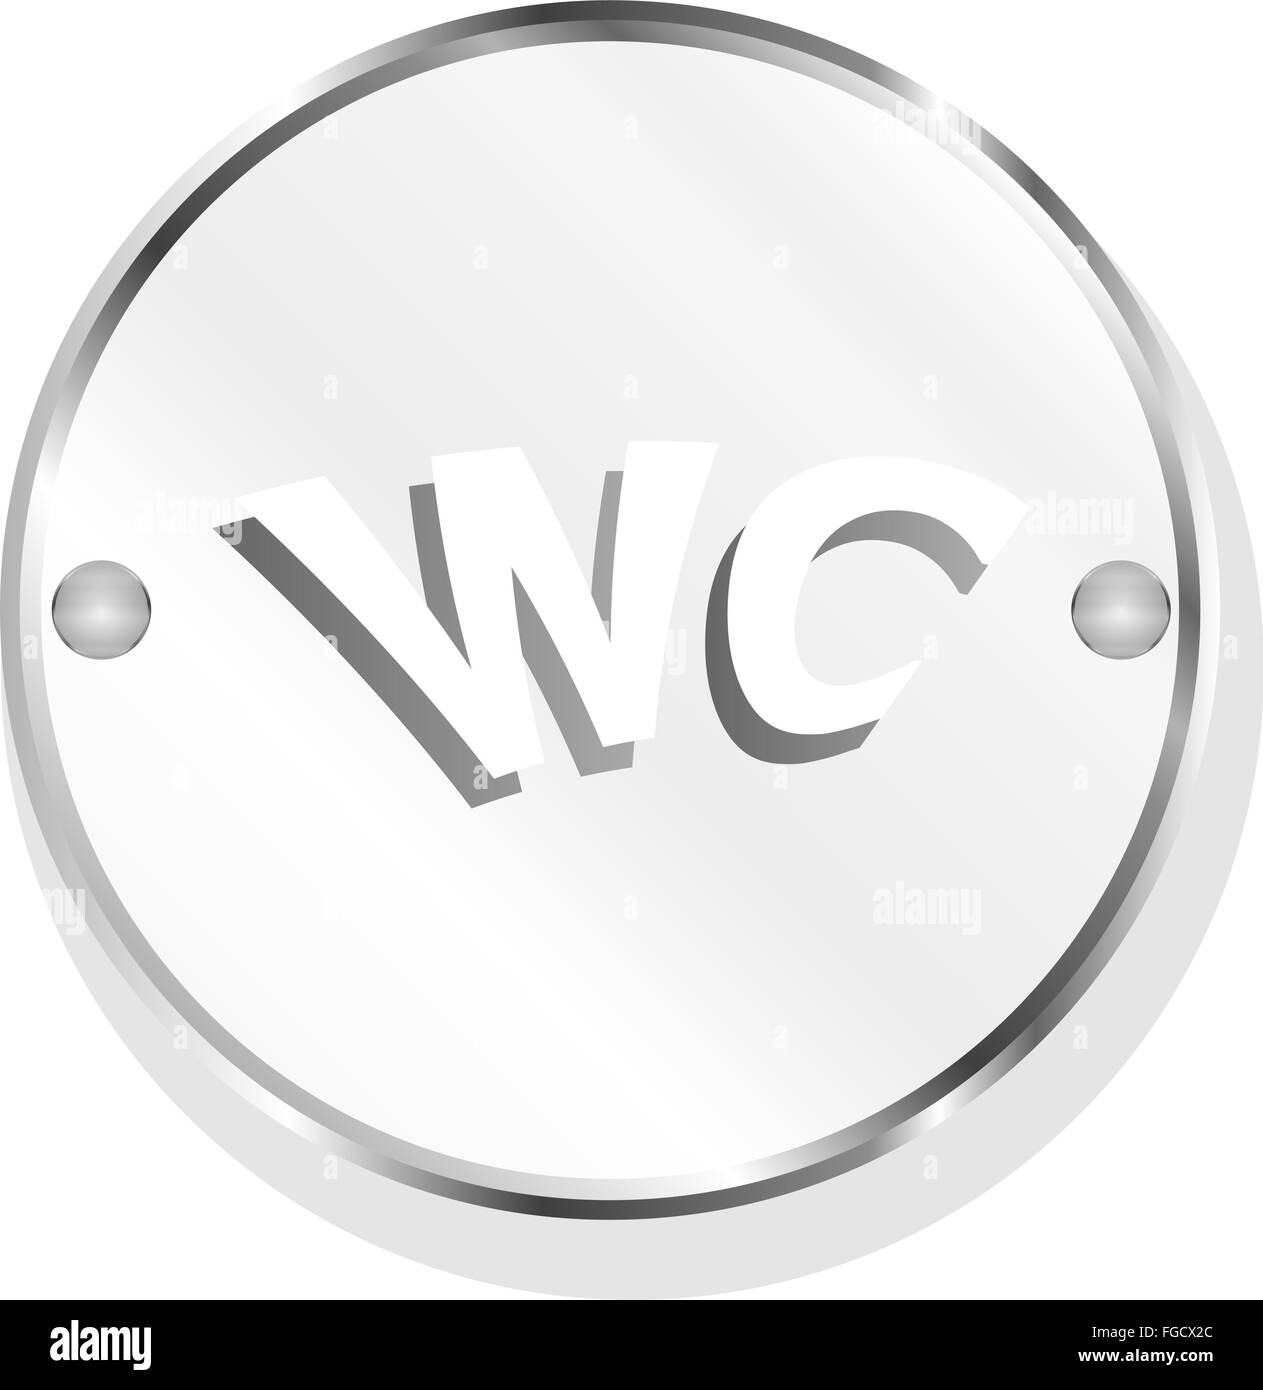 Wc, icône bouton web isolated on white Banque D'Images